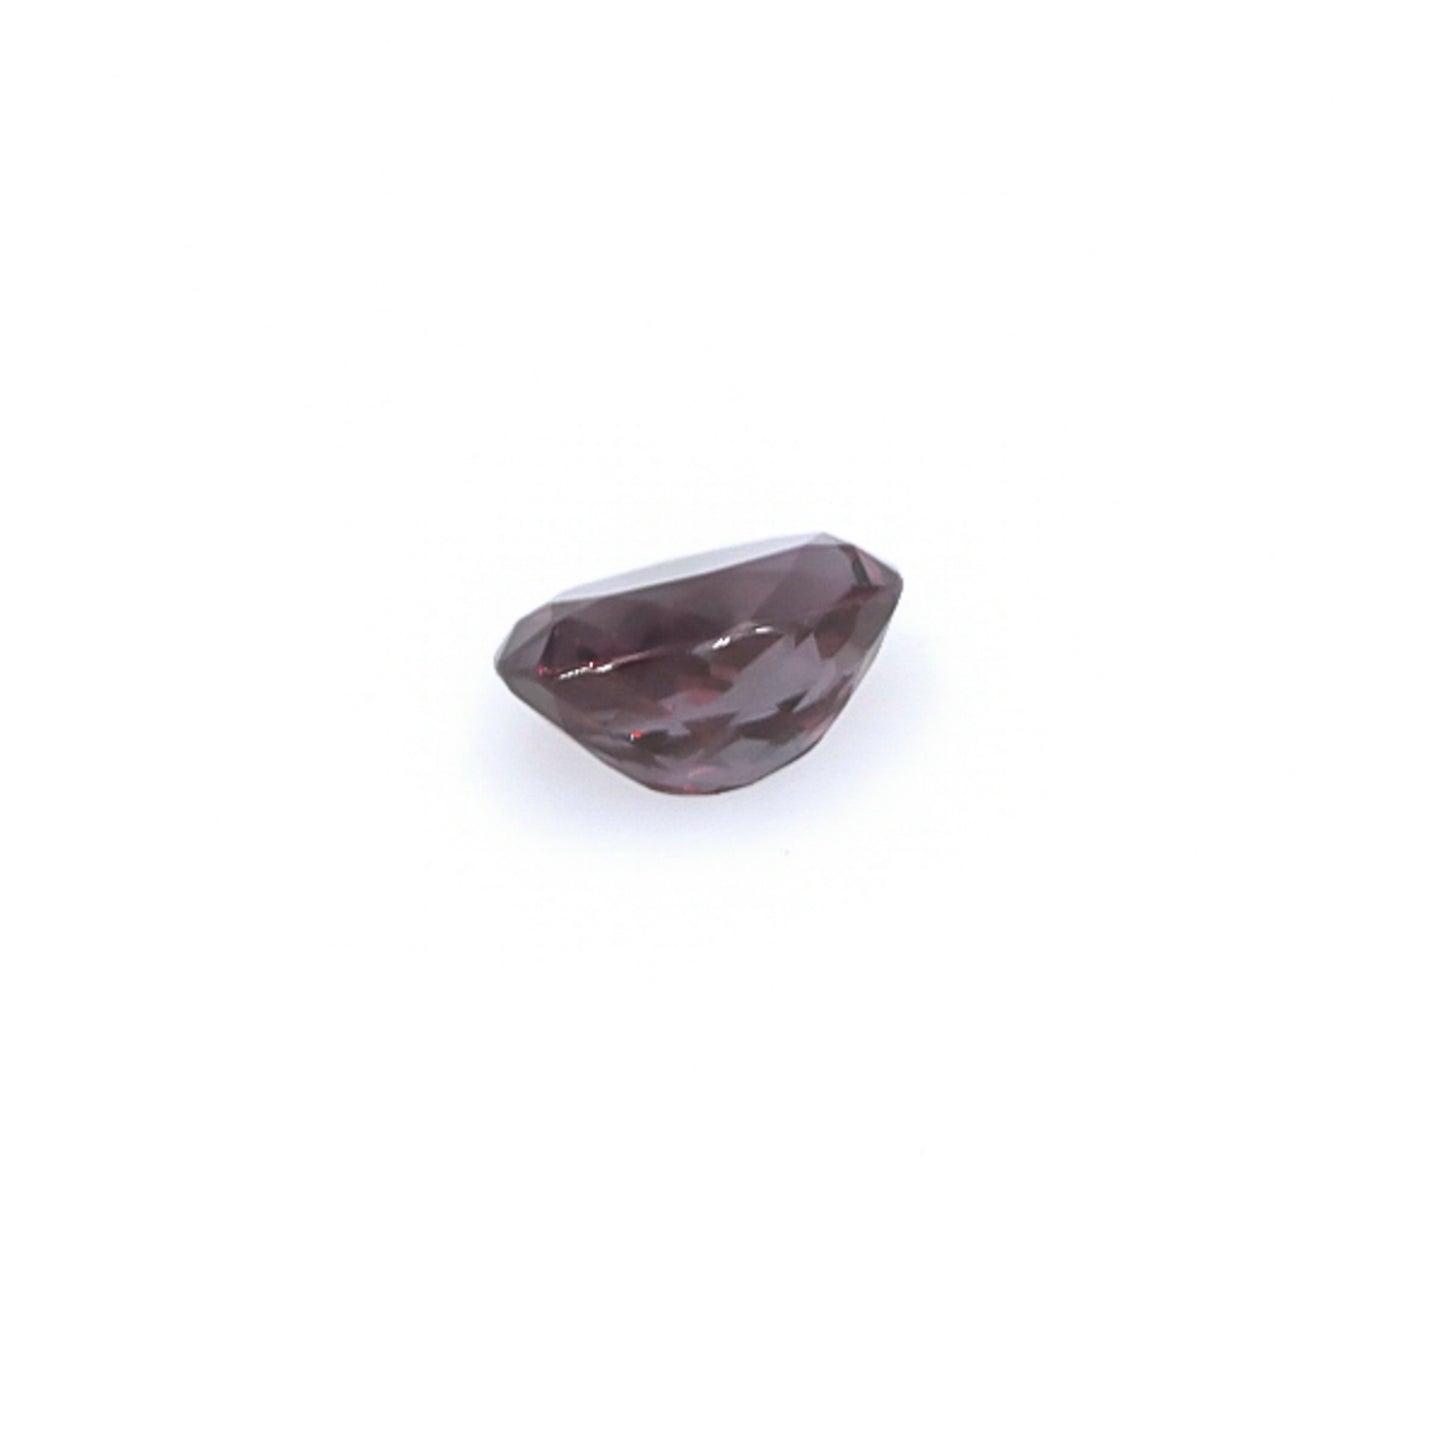 Load image into Gallery viewer, Natural Color Change Garnet 2.82 Carats
